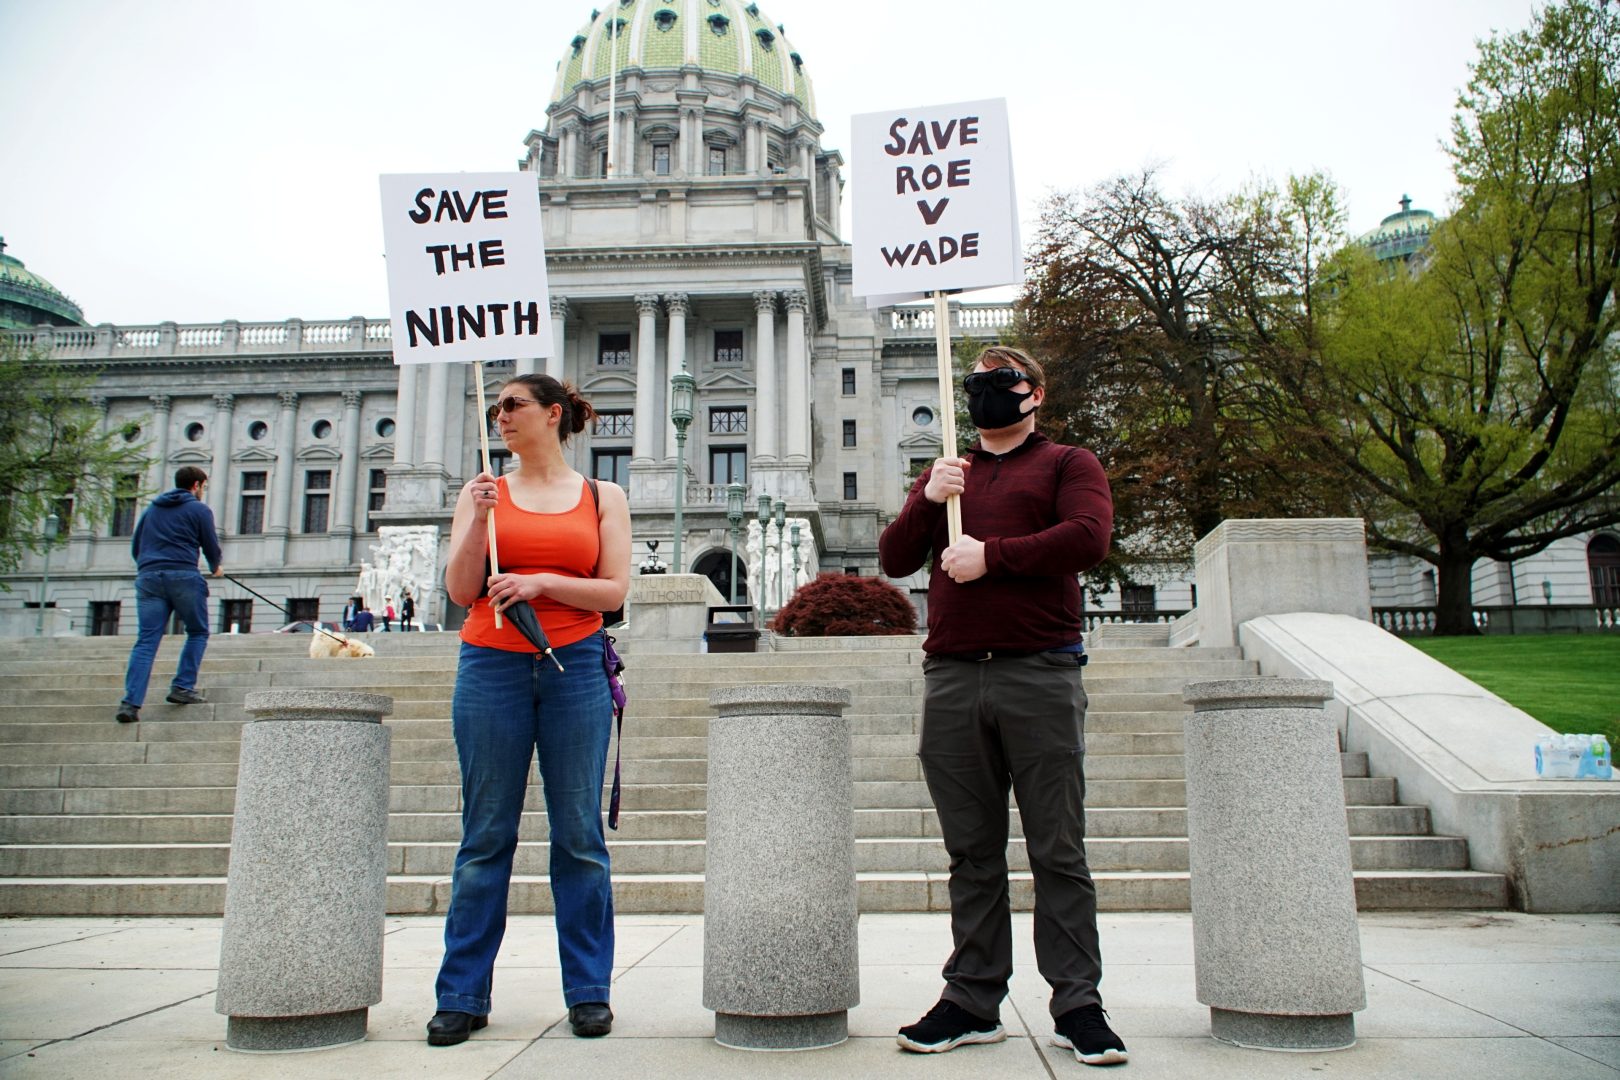 Katherine Deane of Lemoyne and Sam Lowe of Harrisburg protest on May 3, 2022 in front of the state Capitol after the news of a leaked draft opinion from the U.S. Supreme Court that would overturn Roe v. Wade was released. 